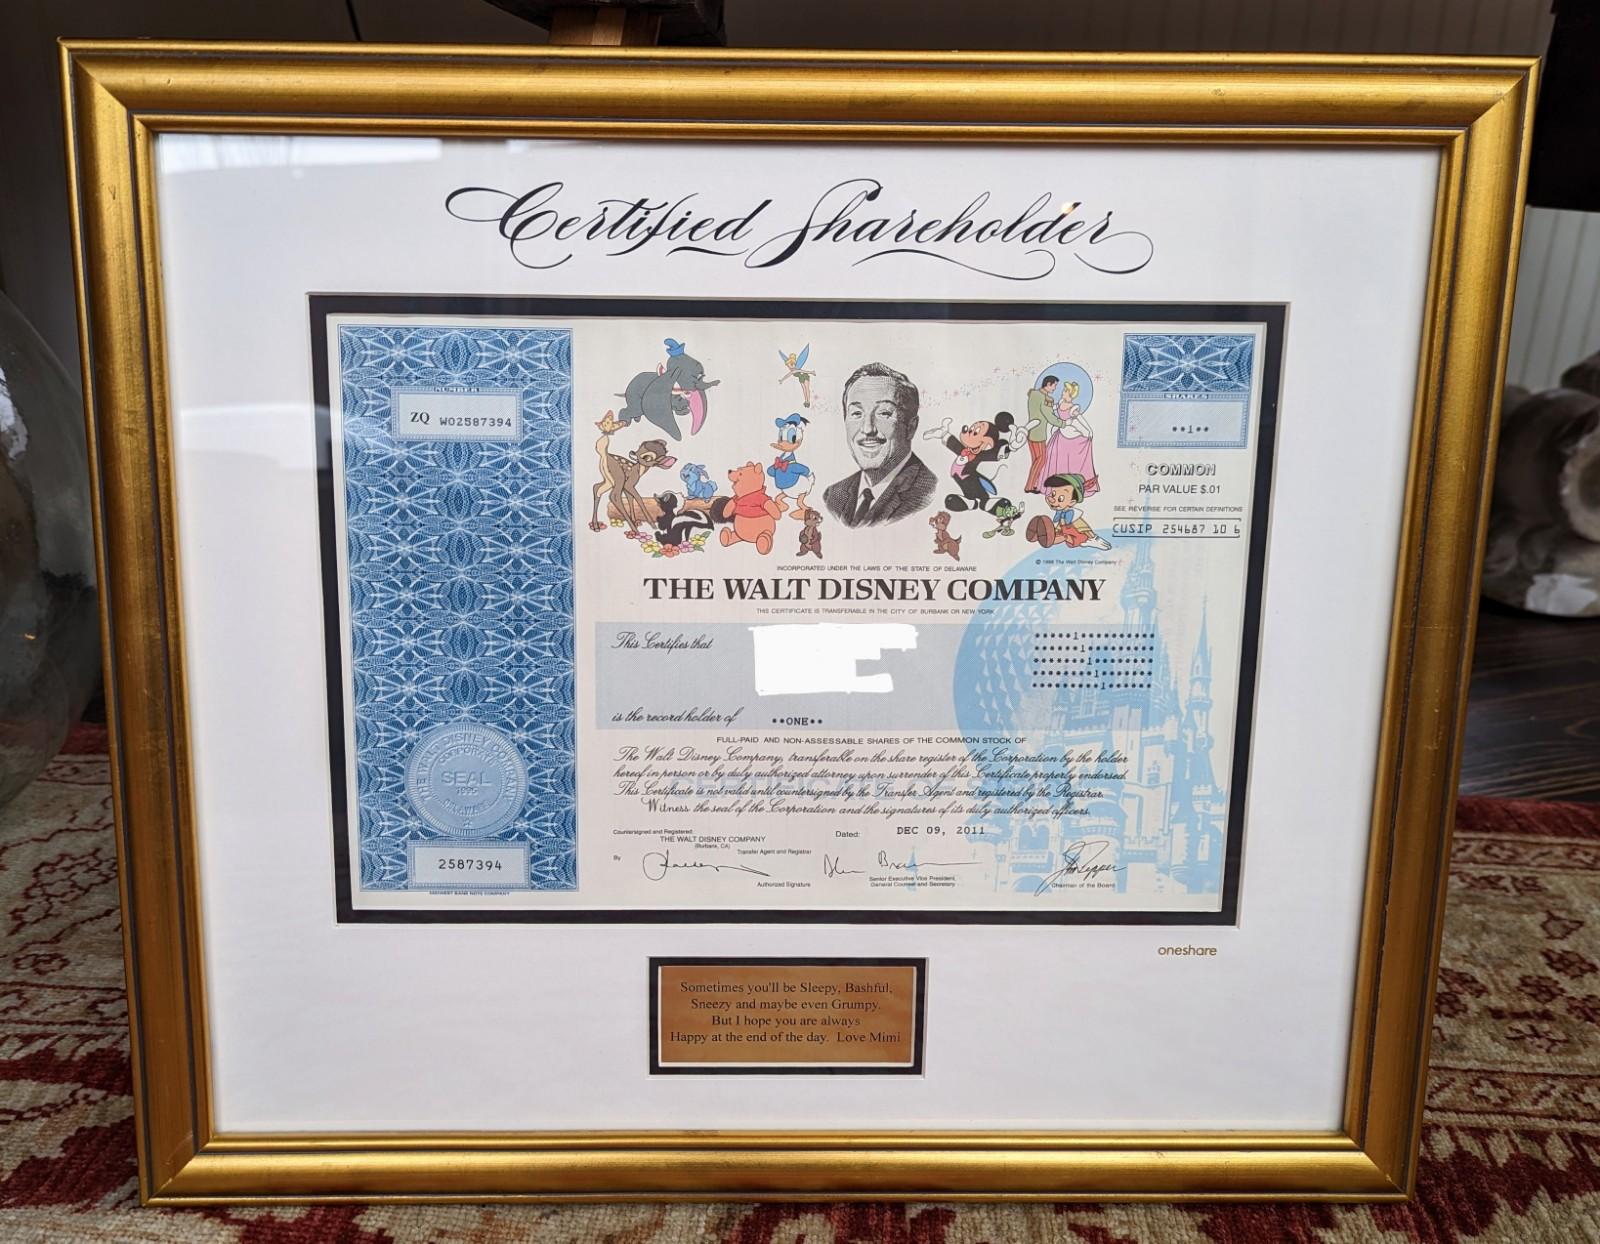 Collectible The Walt Disney Company Stock Certificate, dated 2011. One share of common stock, sold as a novelty stock certificate (address and name have been blocked out for online only). Professionally framed and matted, frame size is 17.5